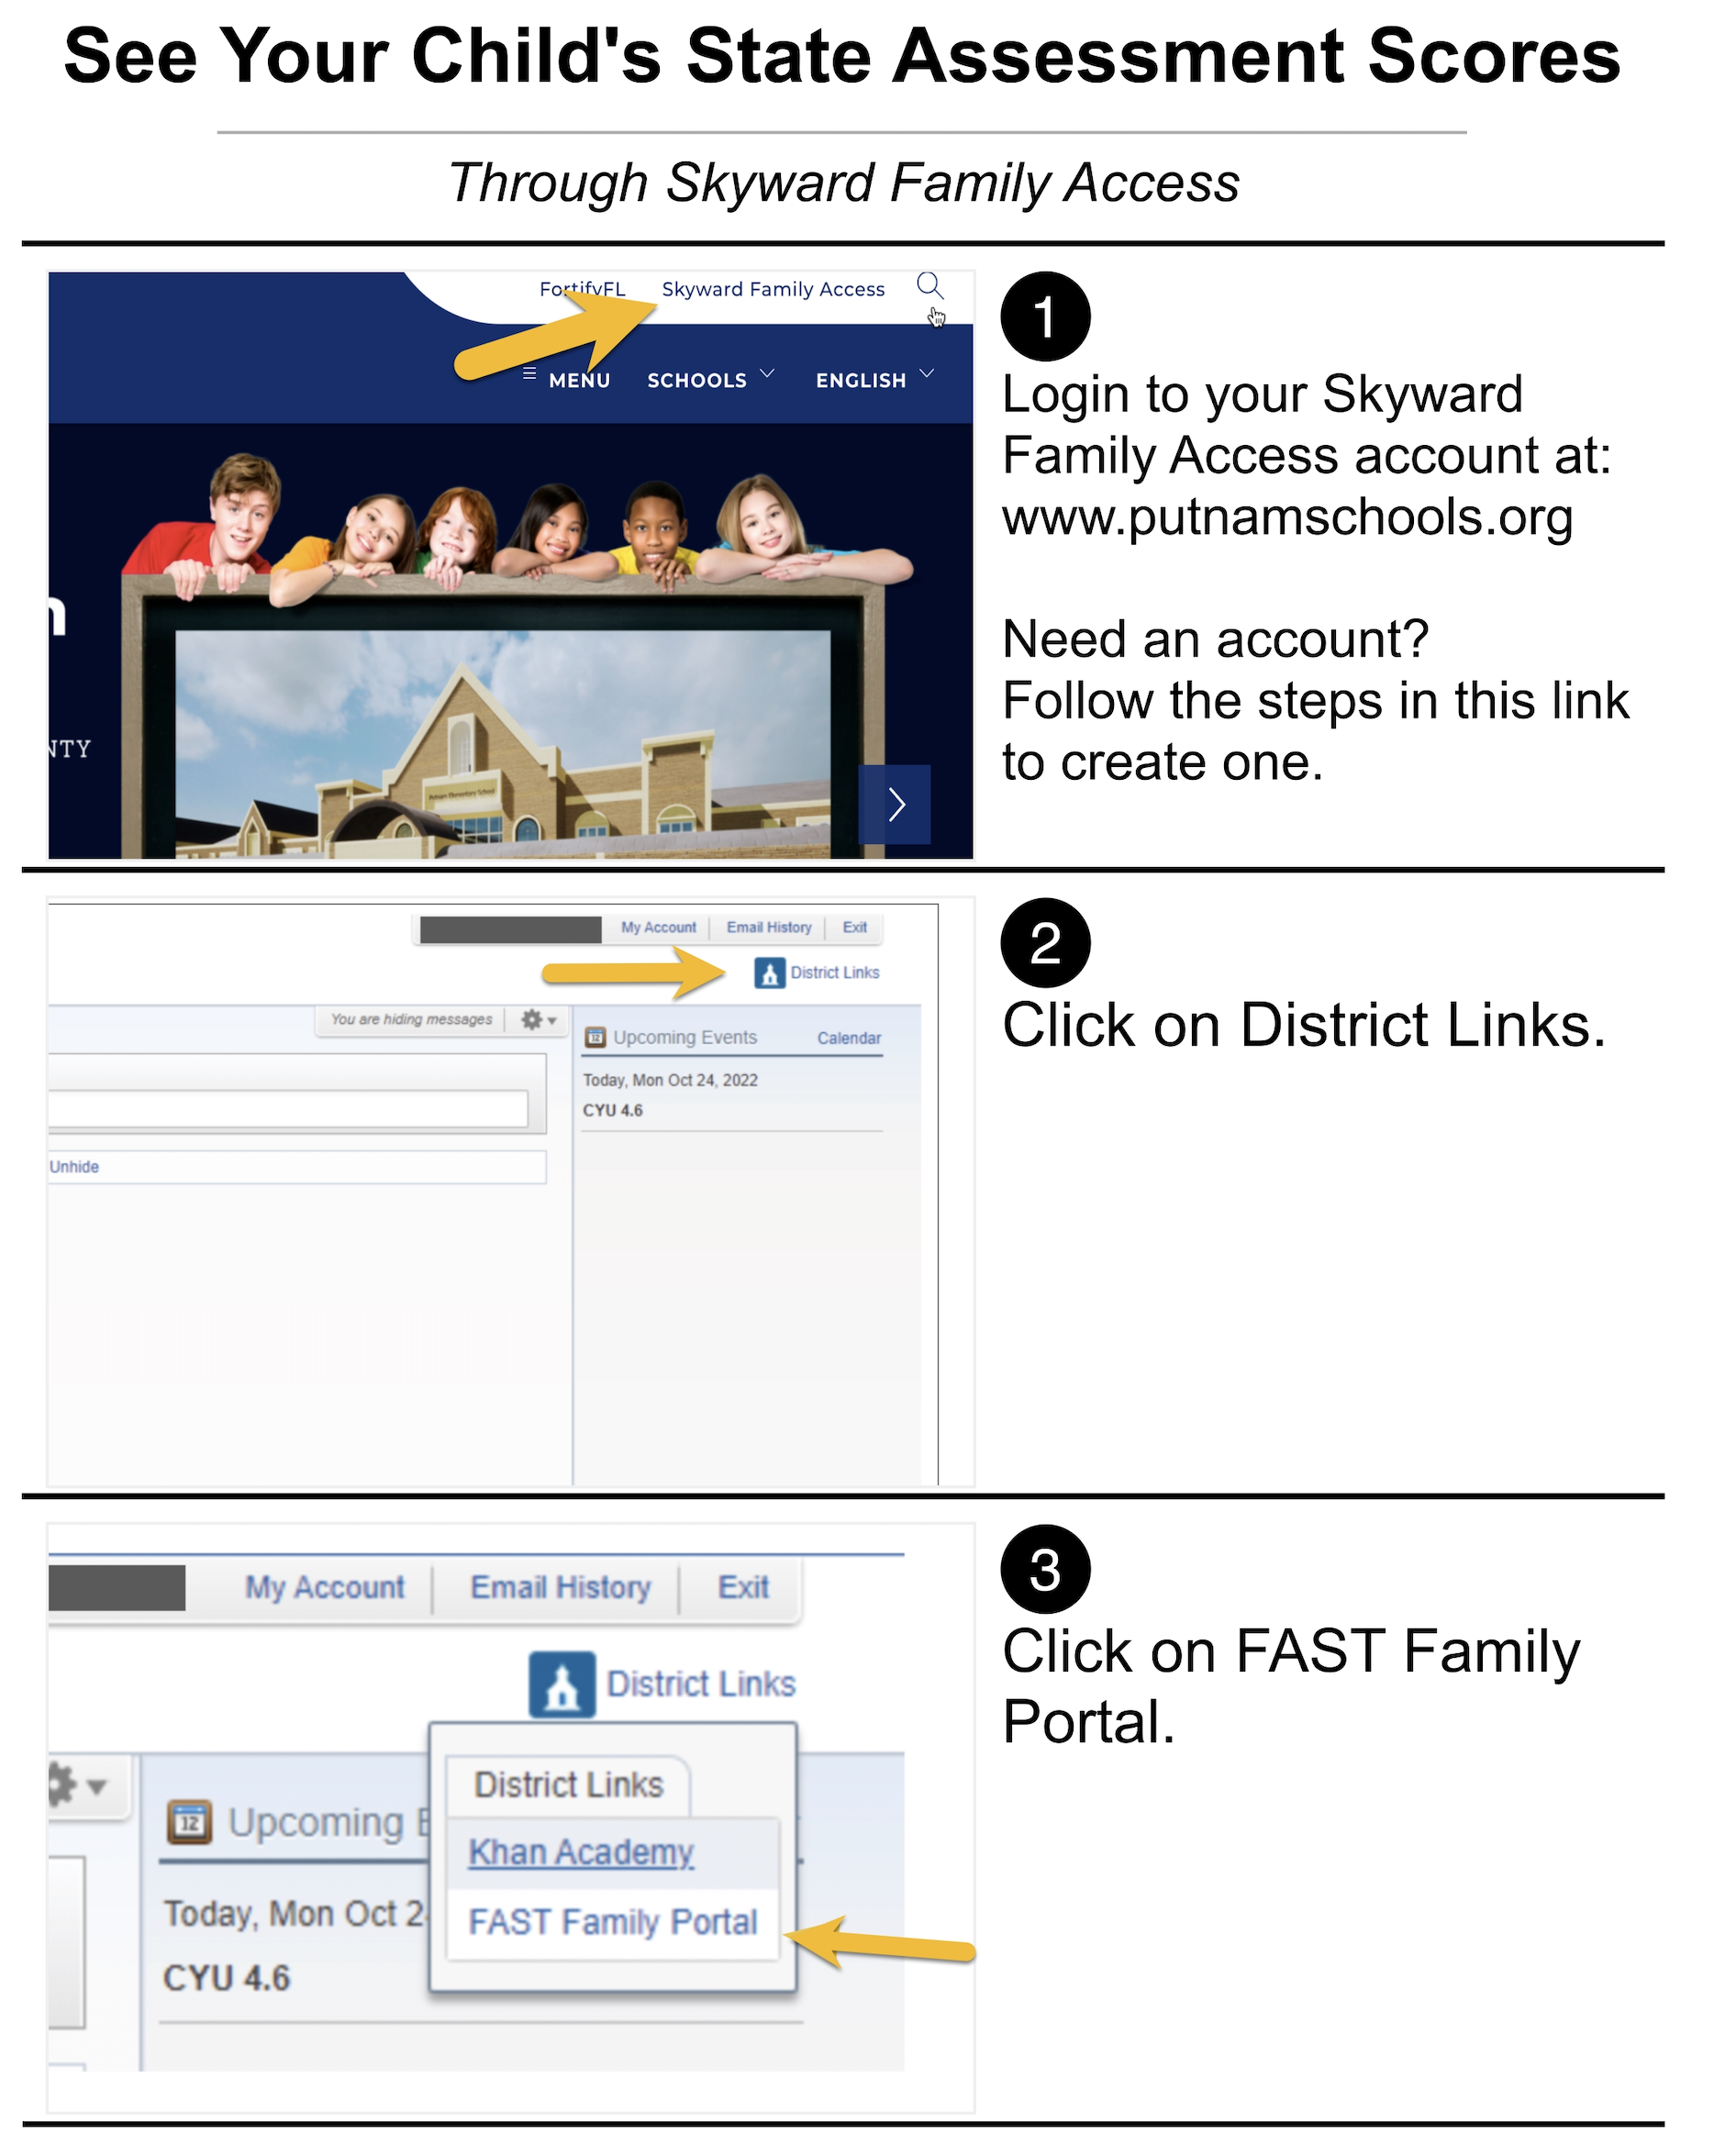 Steps to FAST Family Portal